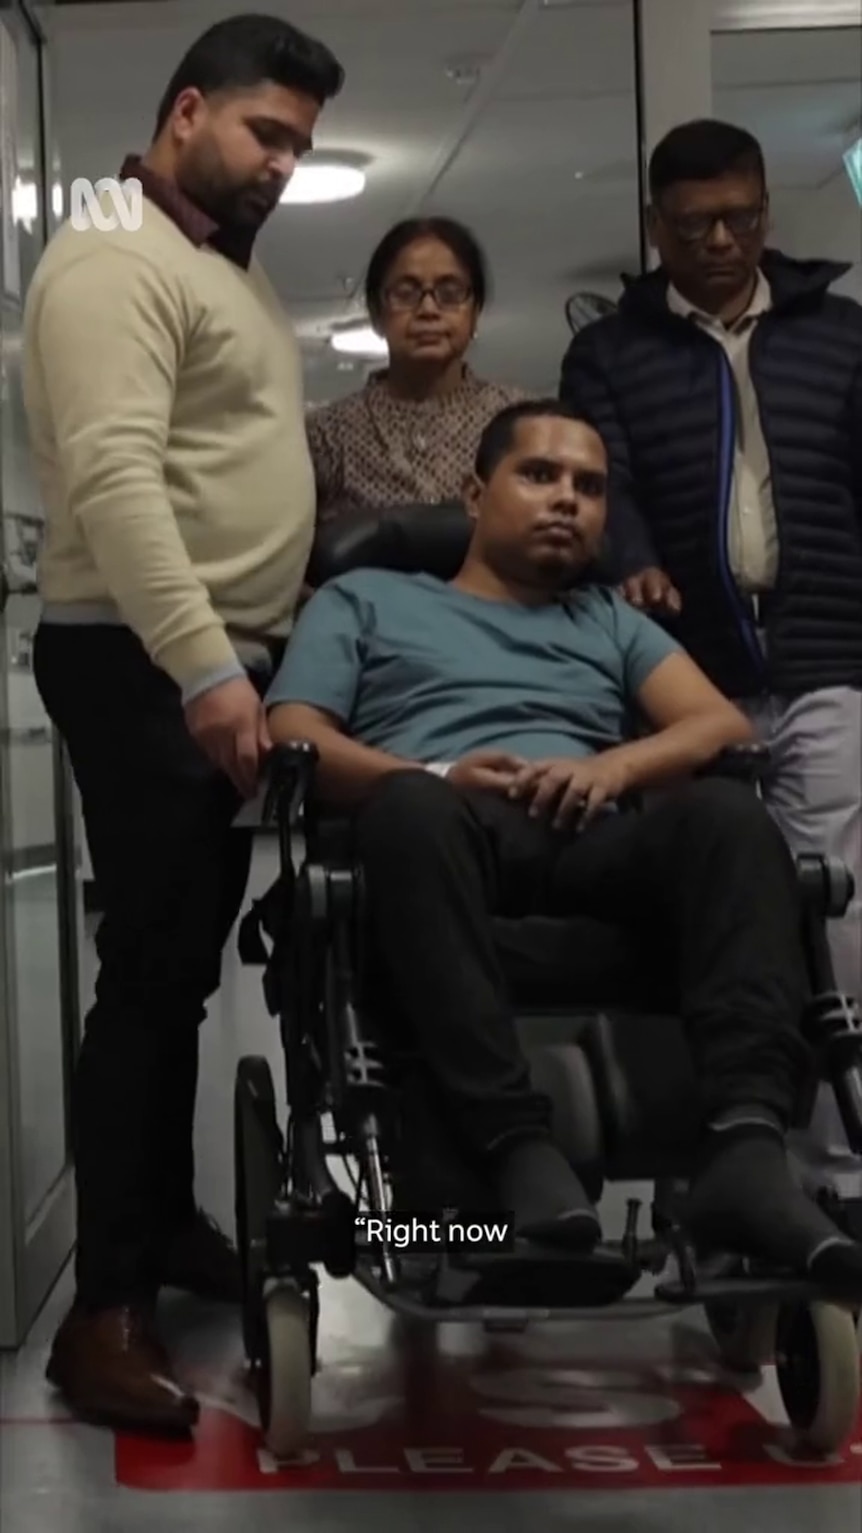 A man with brown skin sits in a wheelchair surrounded by three people with brown skin